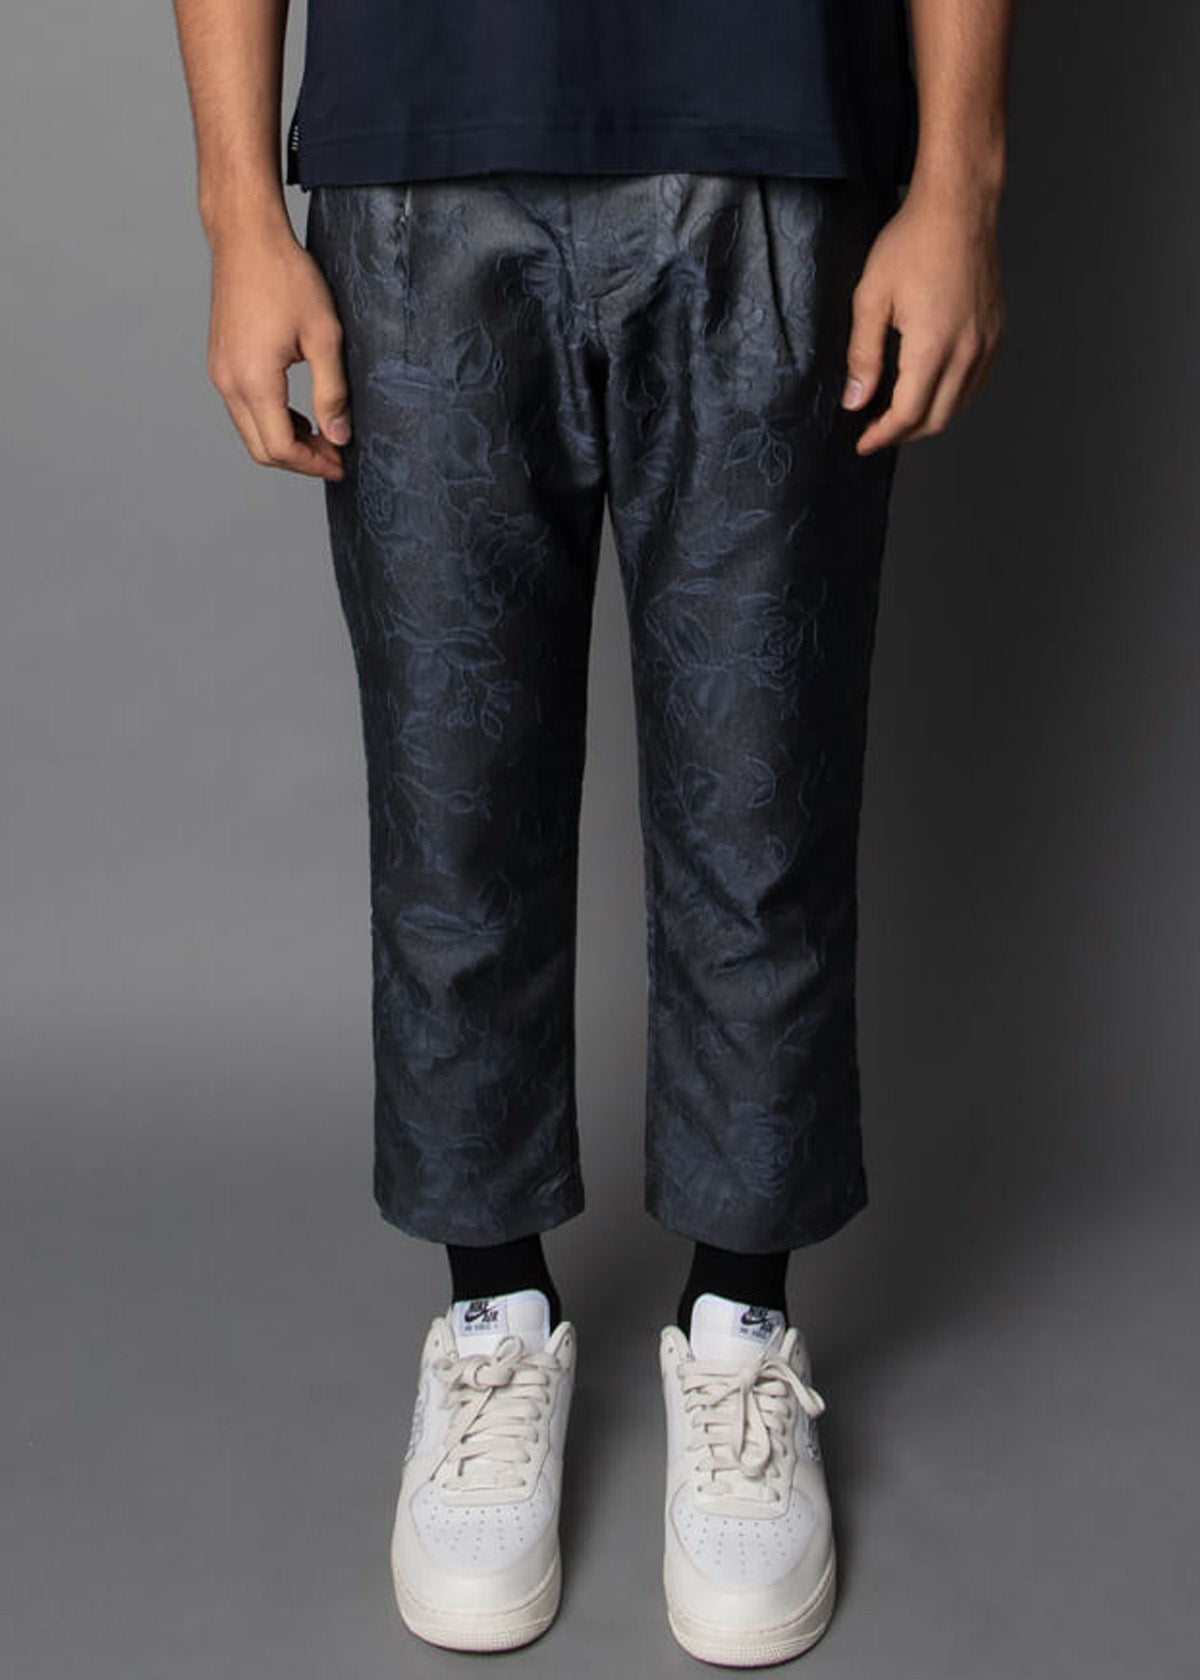 mens pants in a hand-woven tonal-colored brocade fabric